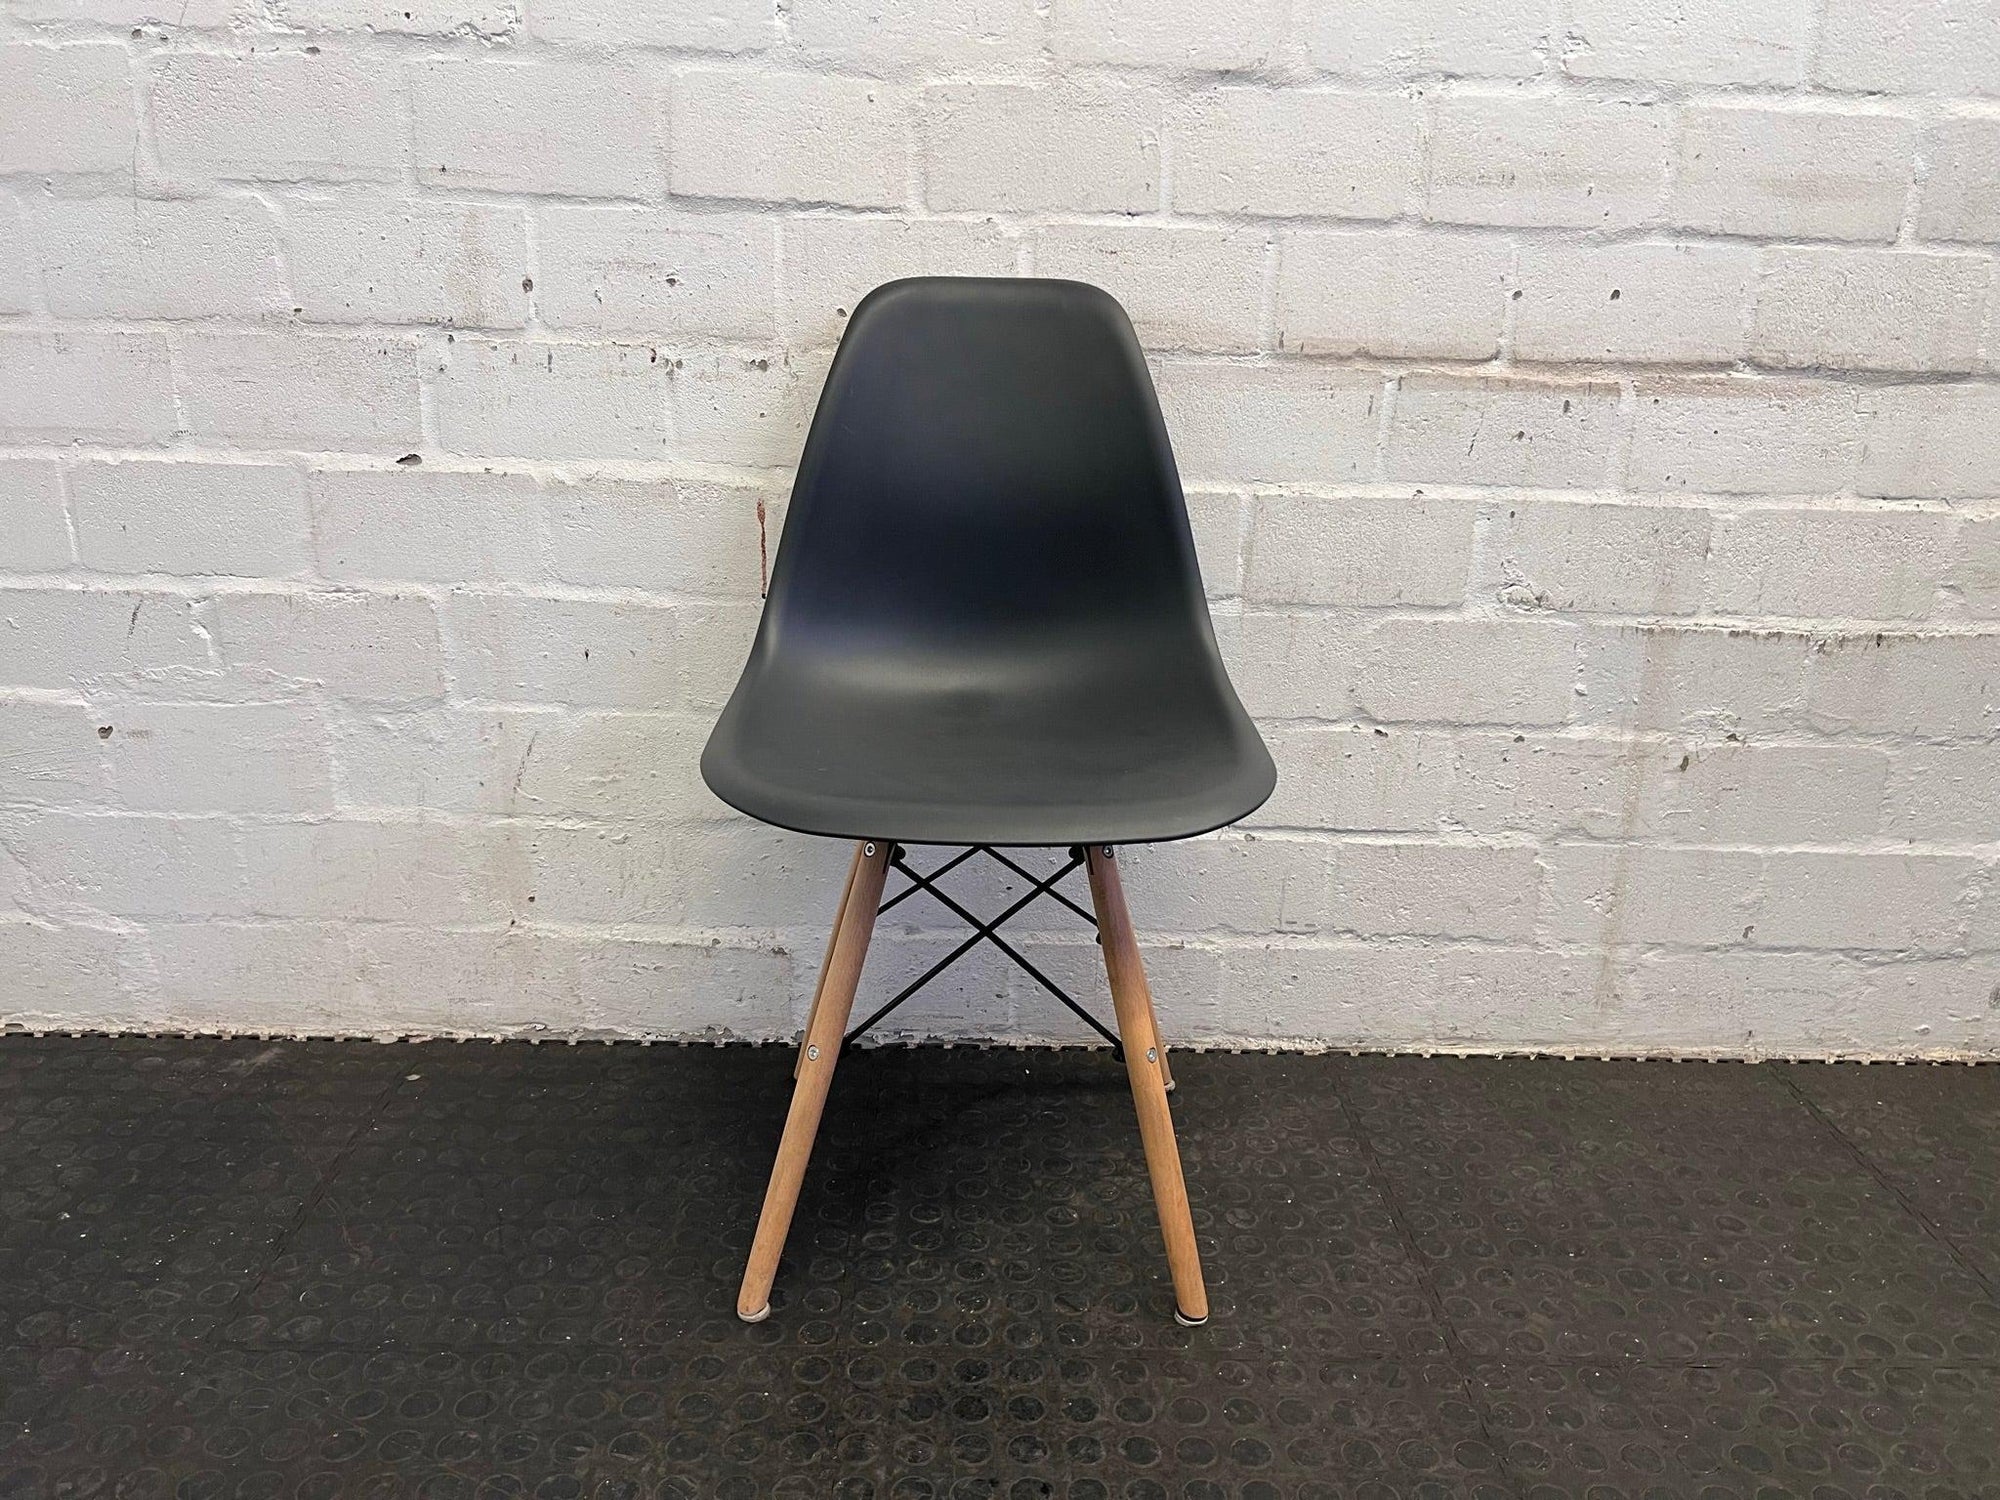 Black Dining Chair with Wooden Legs